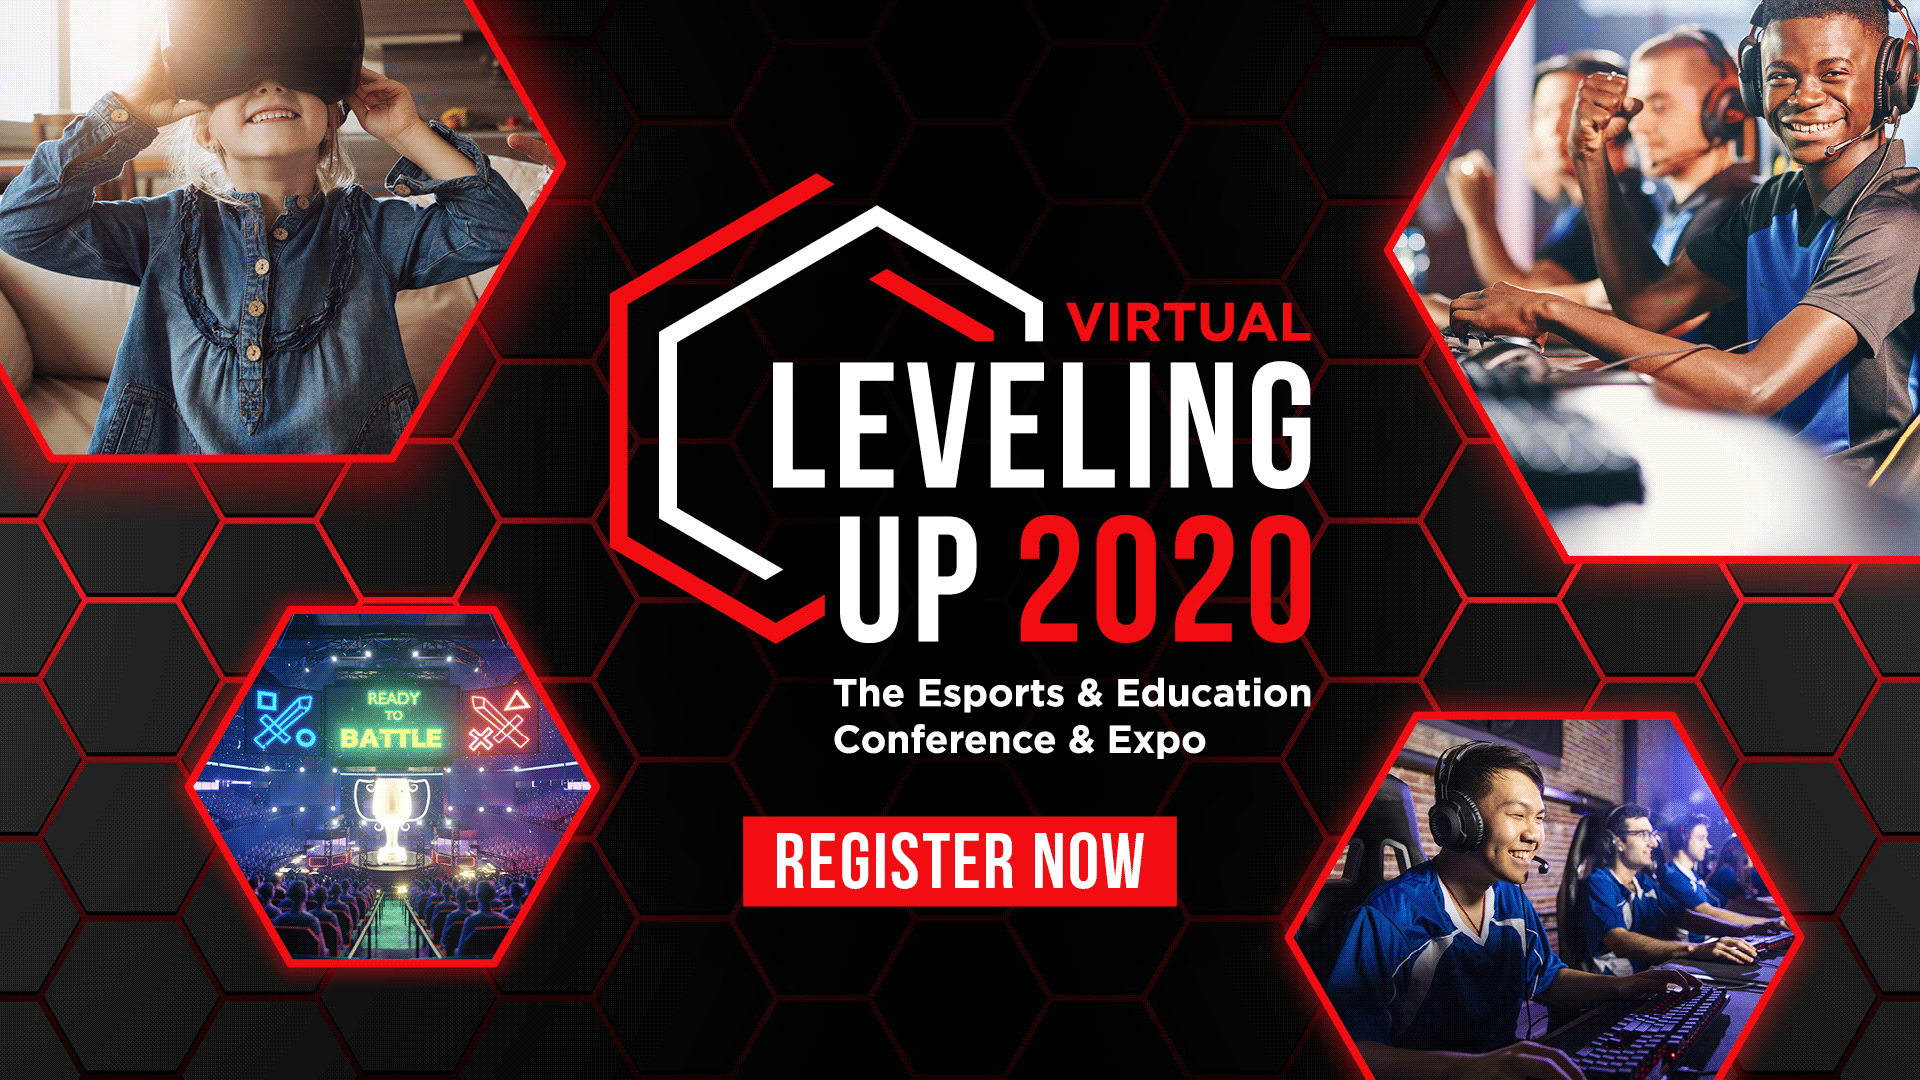 Leveling Up: The Esports and Education Conference & Expo